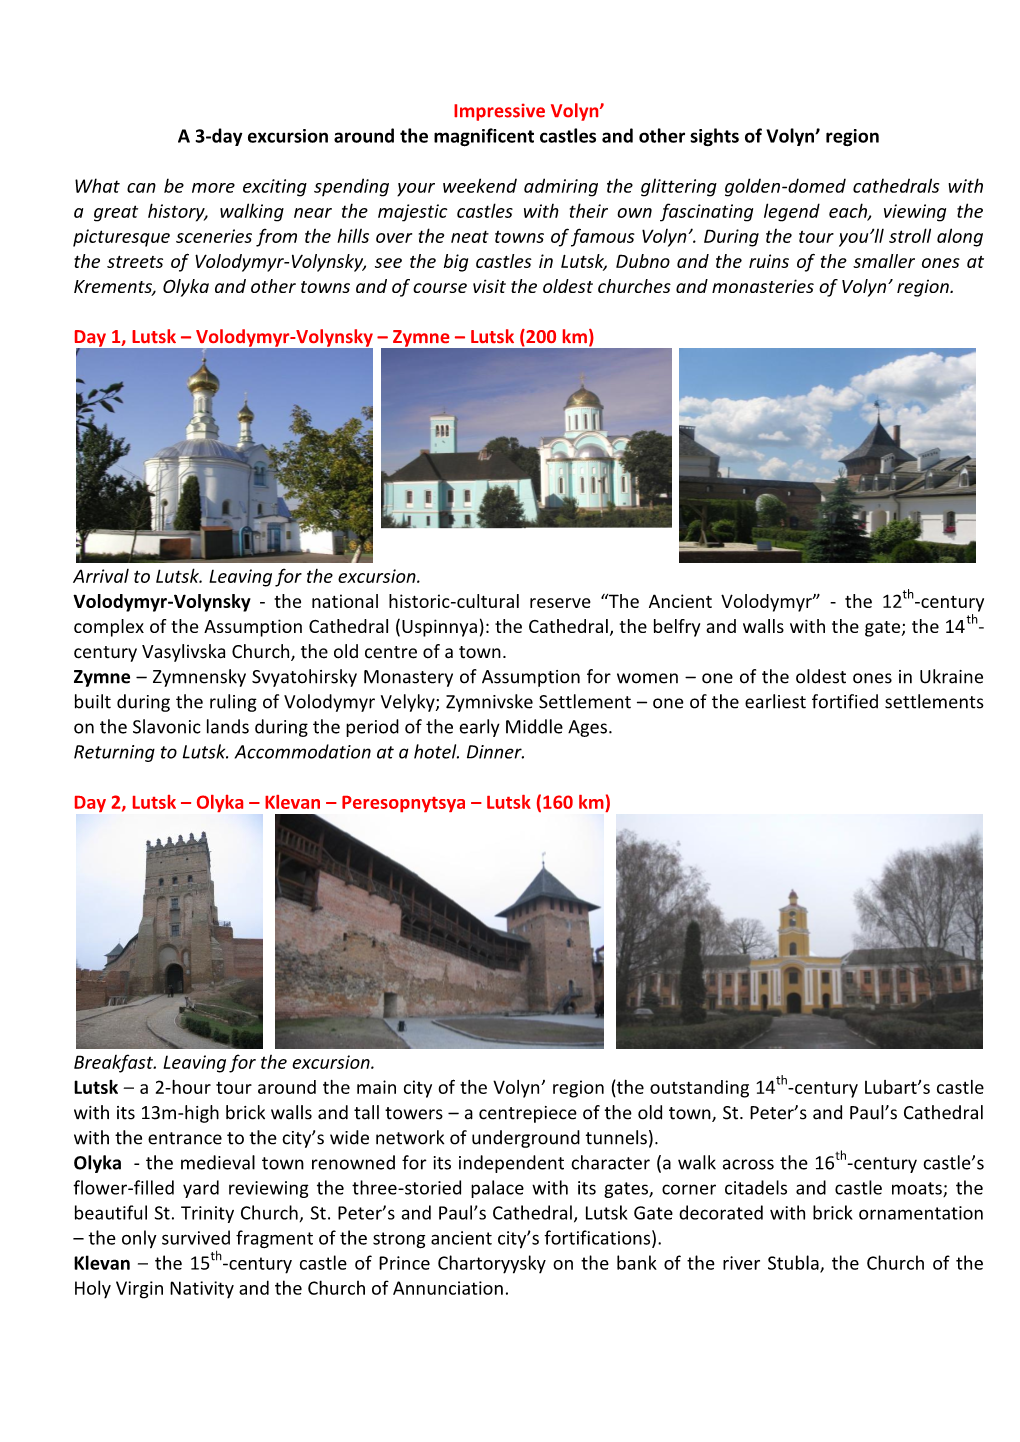 Impressive Volyn' a 3-Day Excursion Around the Magnificent Castles And